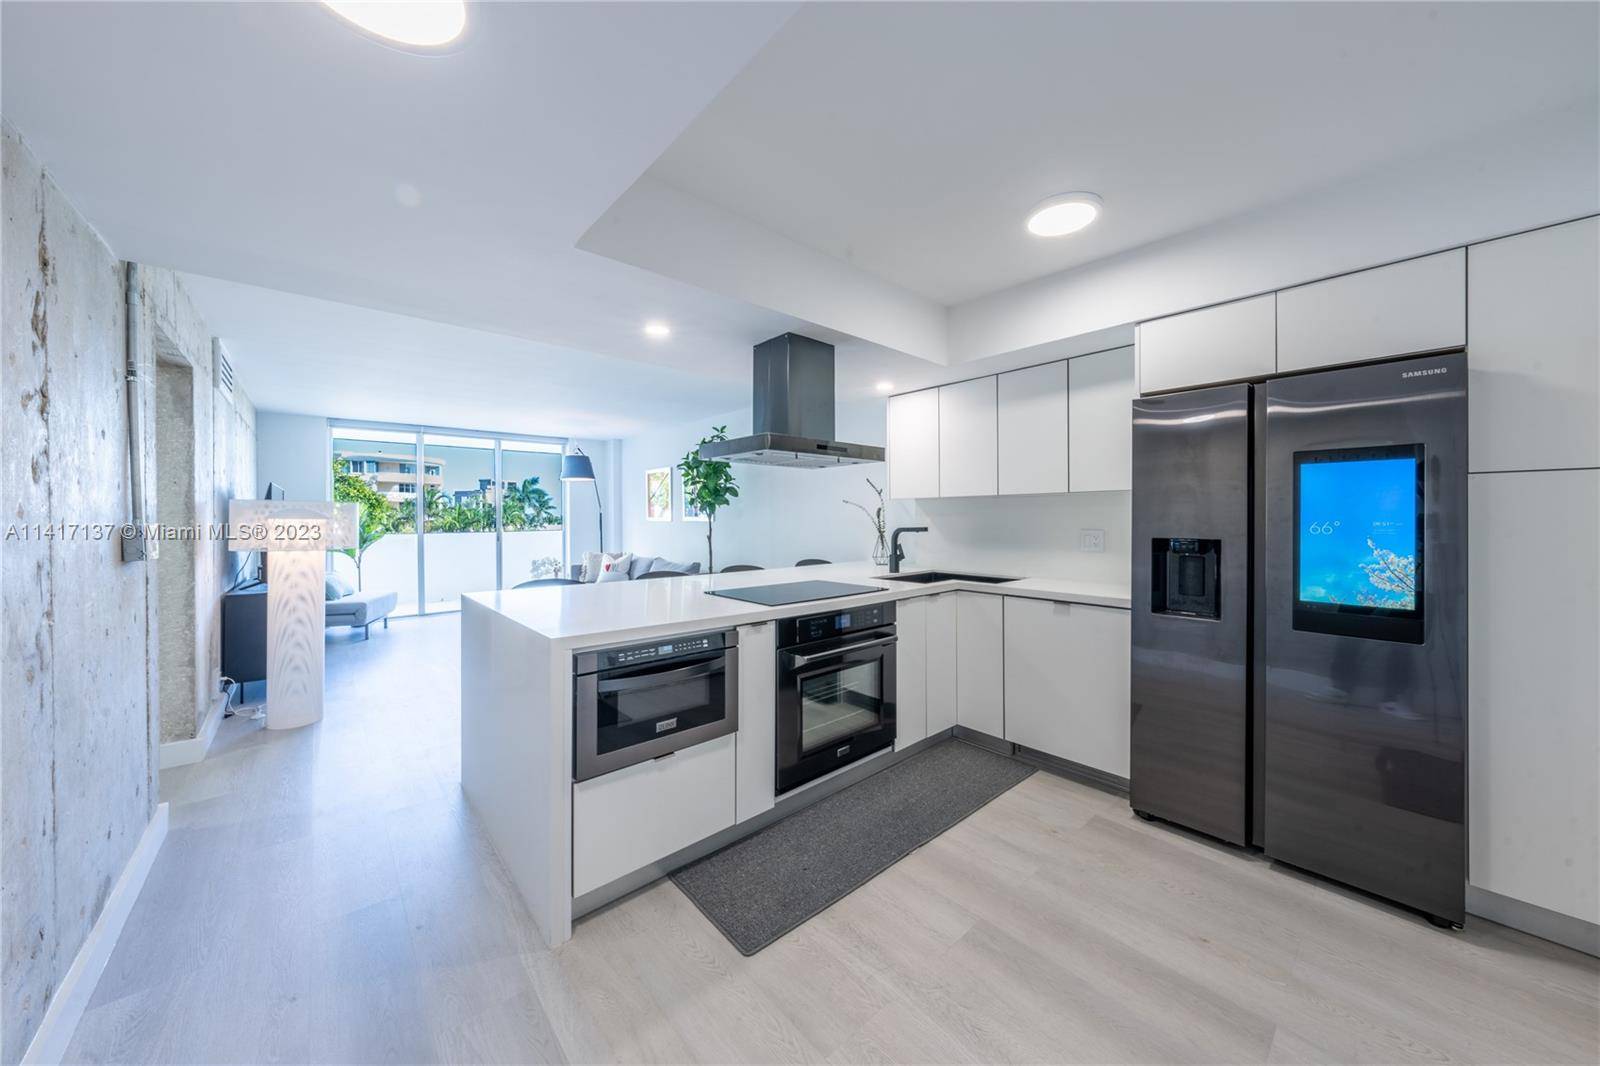 Fully remodeled gem in the heart of Belle Isle, one of the most sought after neighborhoods in South Beach, located just a quick walk away from Sunset Harbor, Lincoln Road, ...